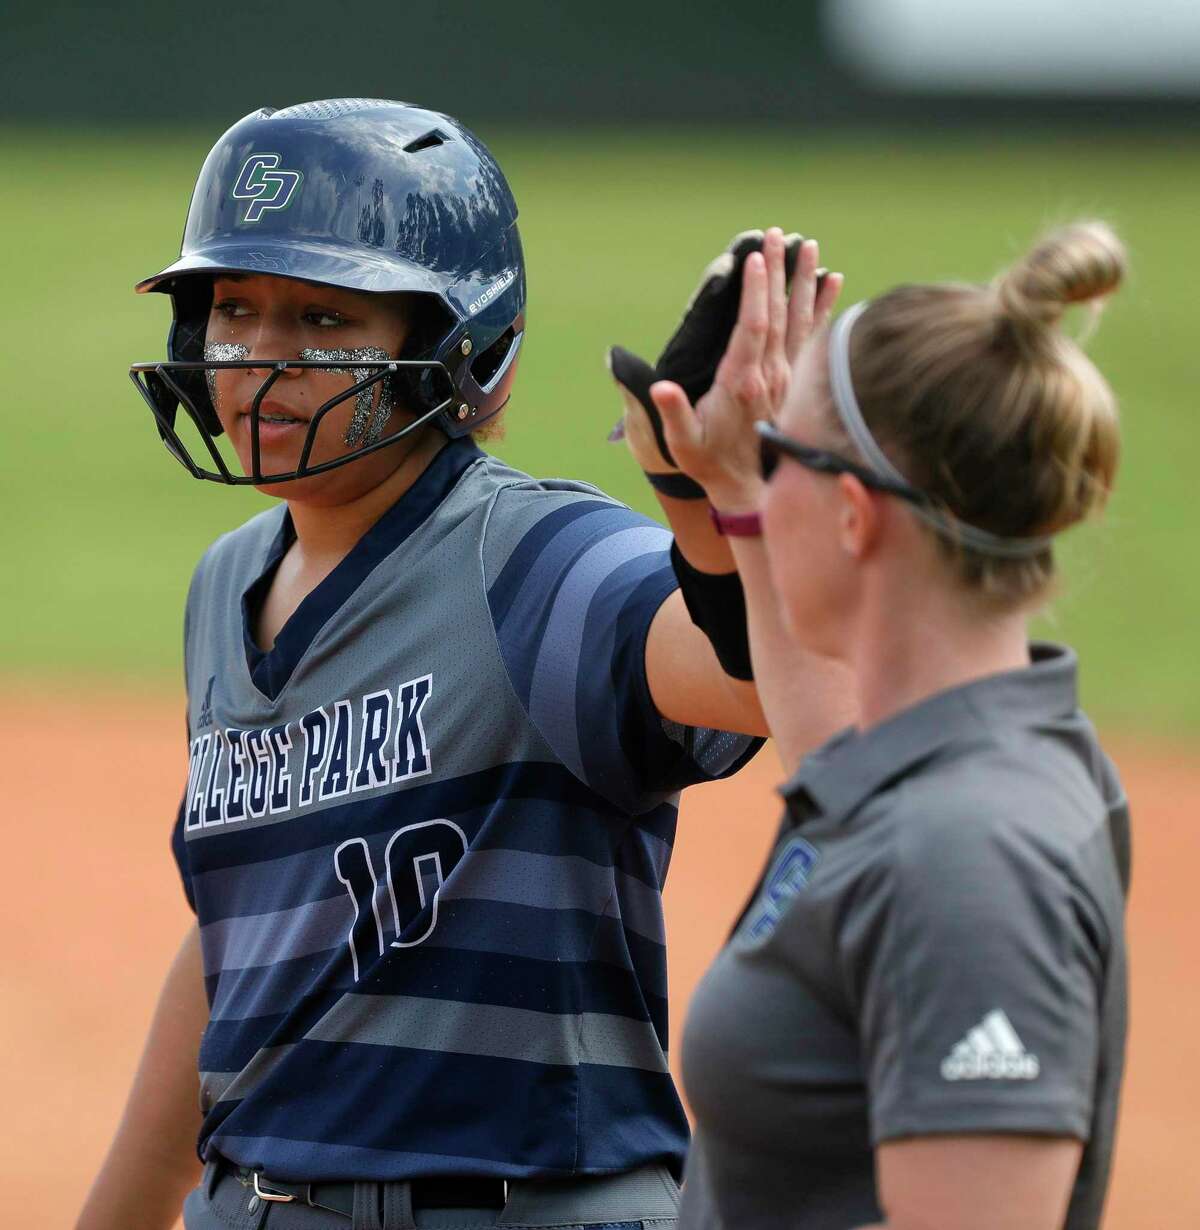 Jenny Battiste #10 of College Park gets a high-five after hitting a single during the first inning of a District 15-6A high school softball game at College Park High School, Wednesday, March 11, 2020, in The Woodlands.